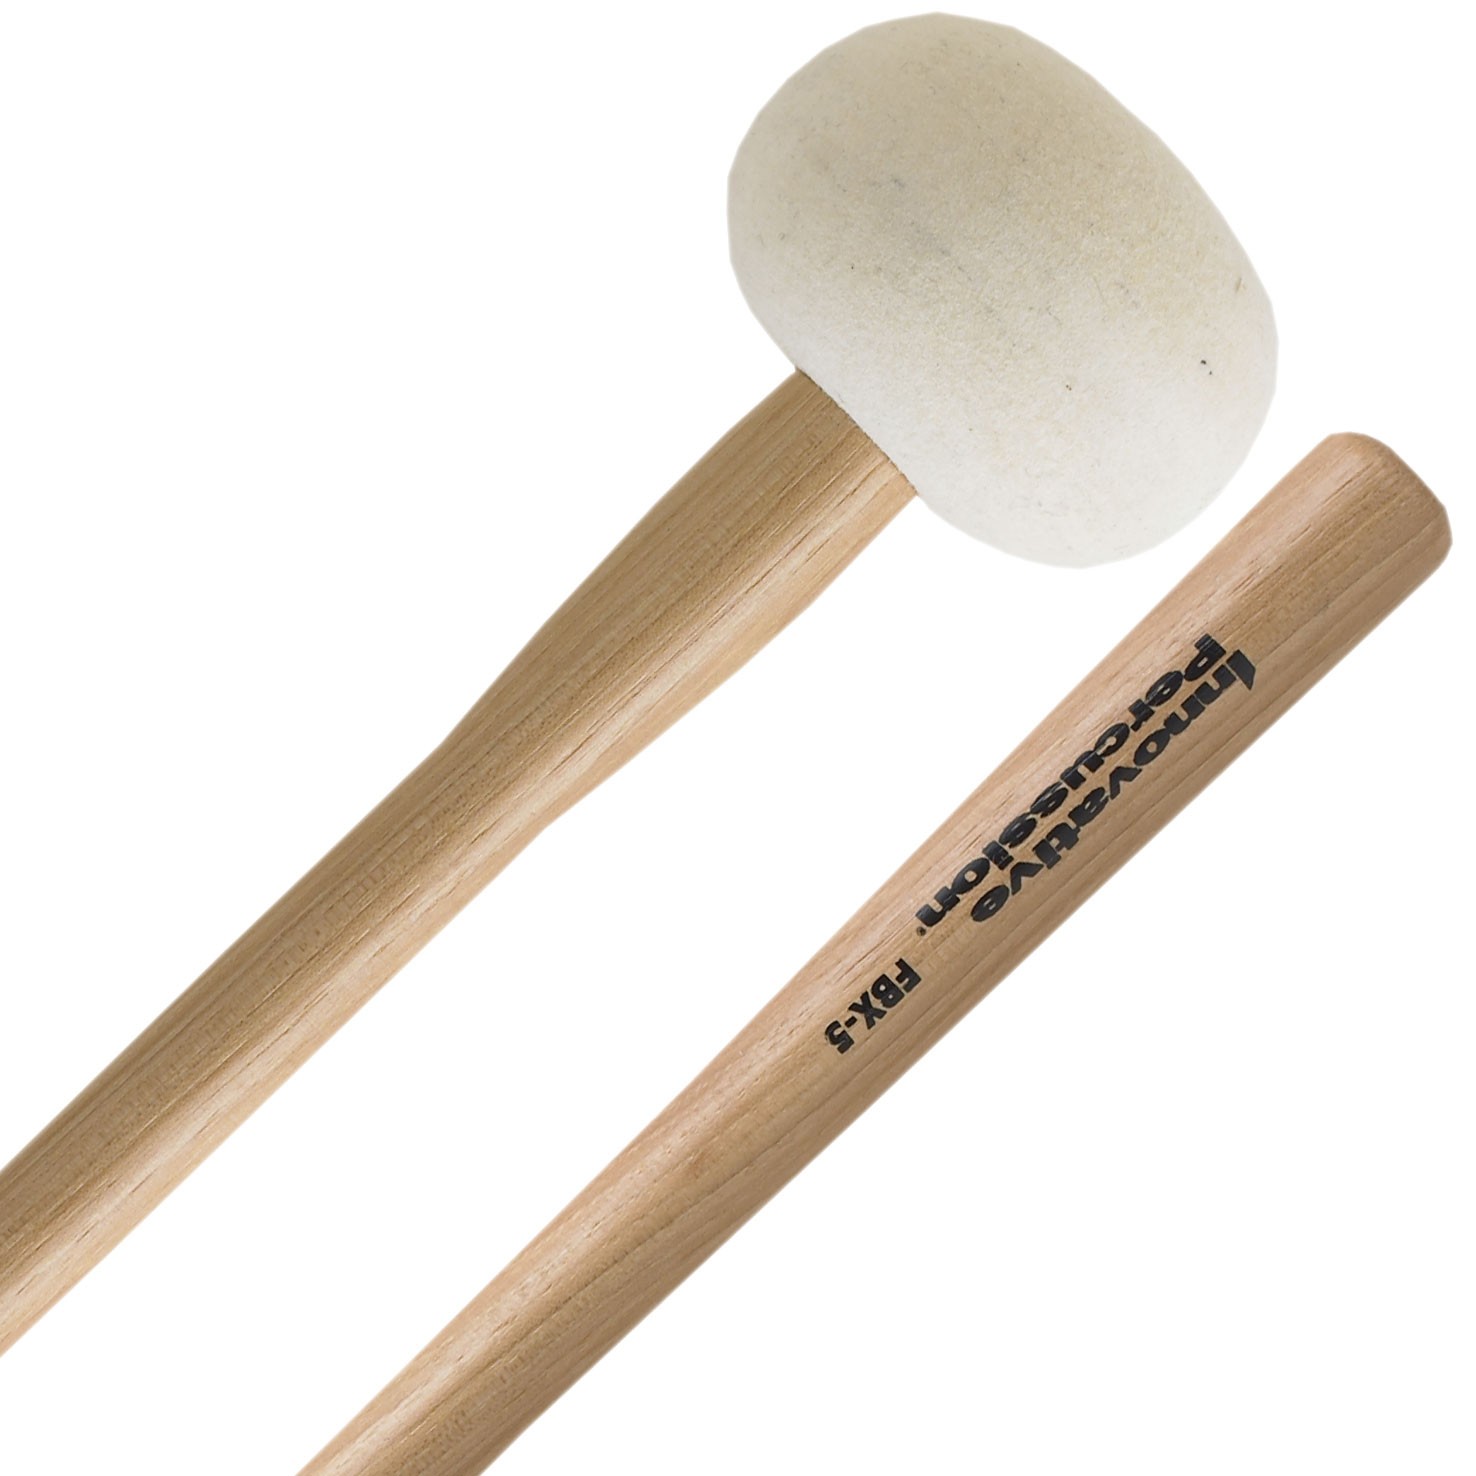 Innovative Percussion FBX-5 Field Series Extra Large Bass Drum Mallets